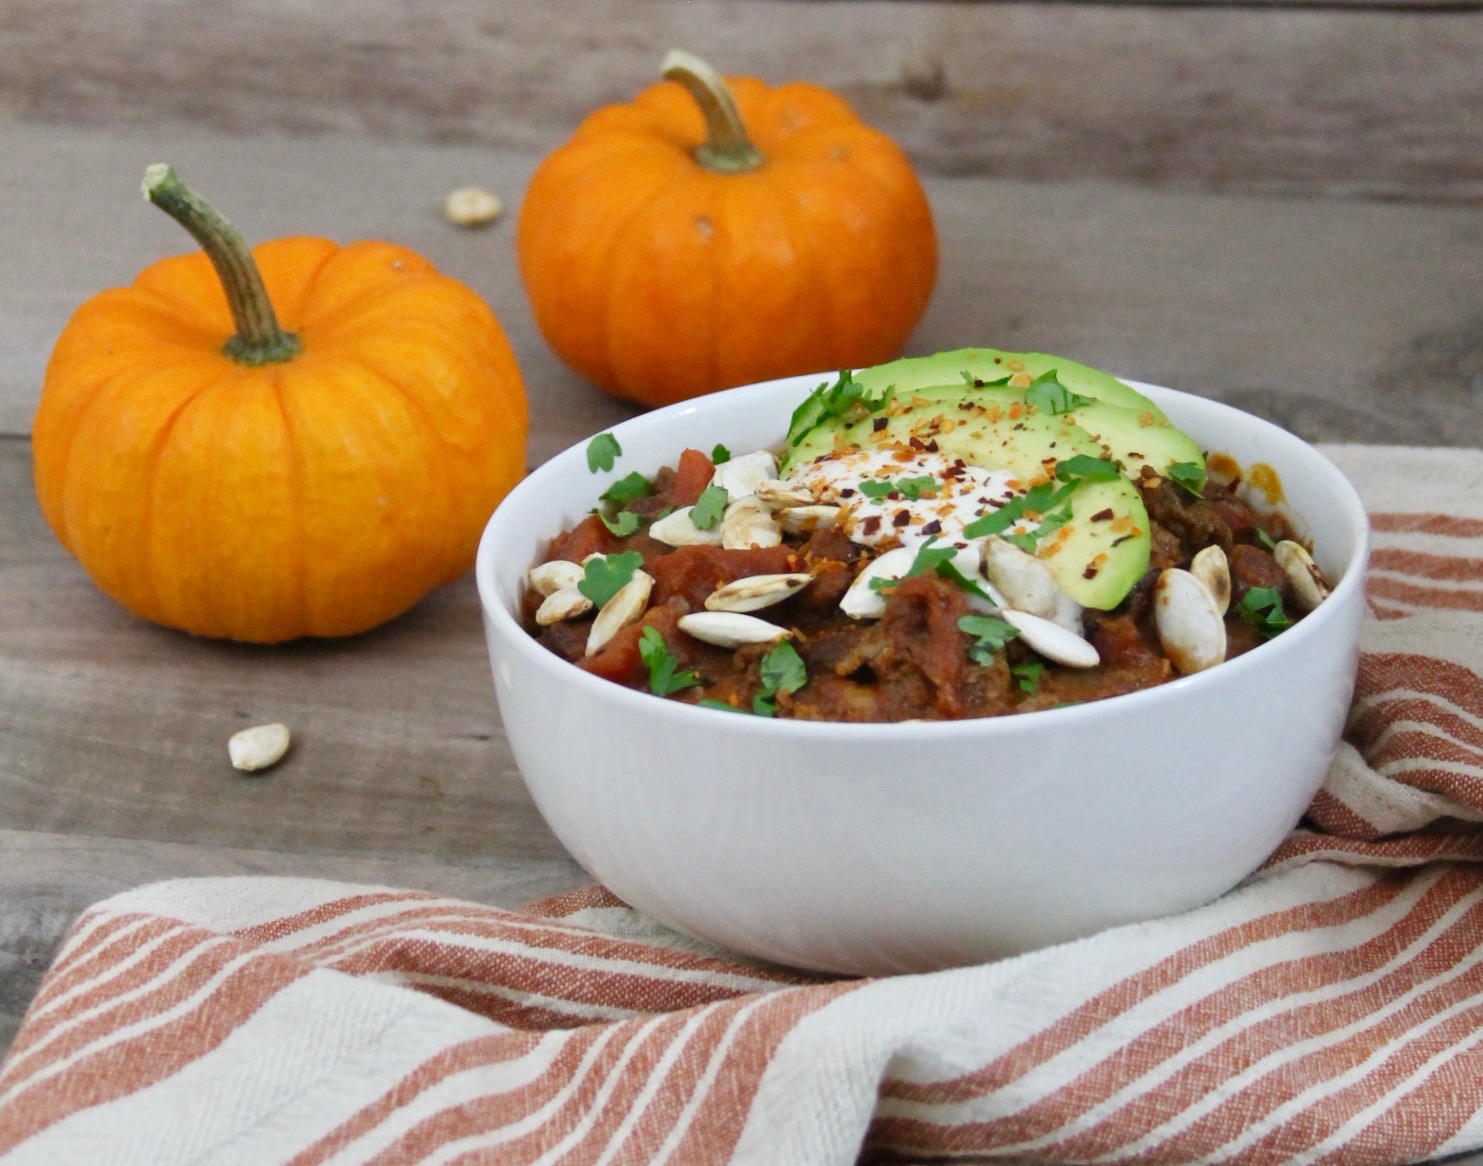 This chipotle beef pumpkin chili takes chili to a whole new level with its subtle sweetness and smoky heat for a fall dish that is sure to become this season's favorite slow cooker chili recipe.